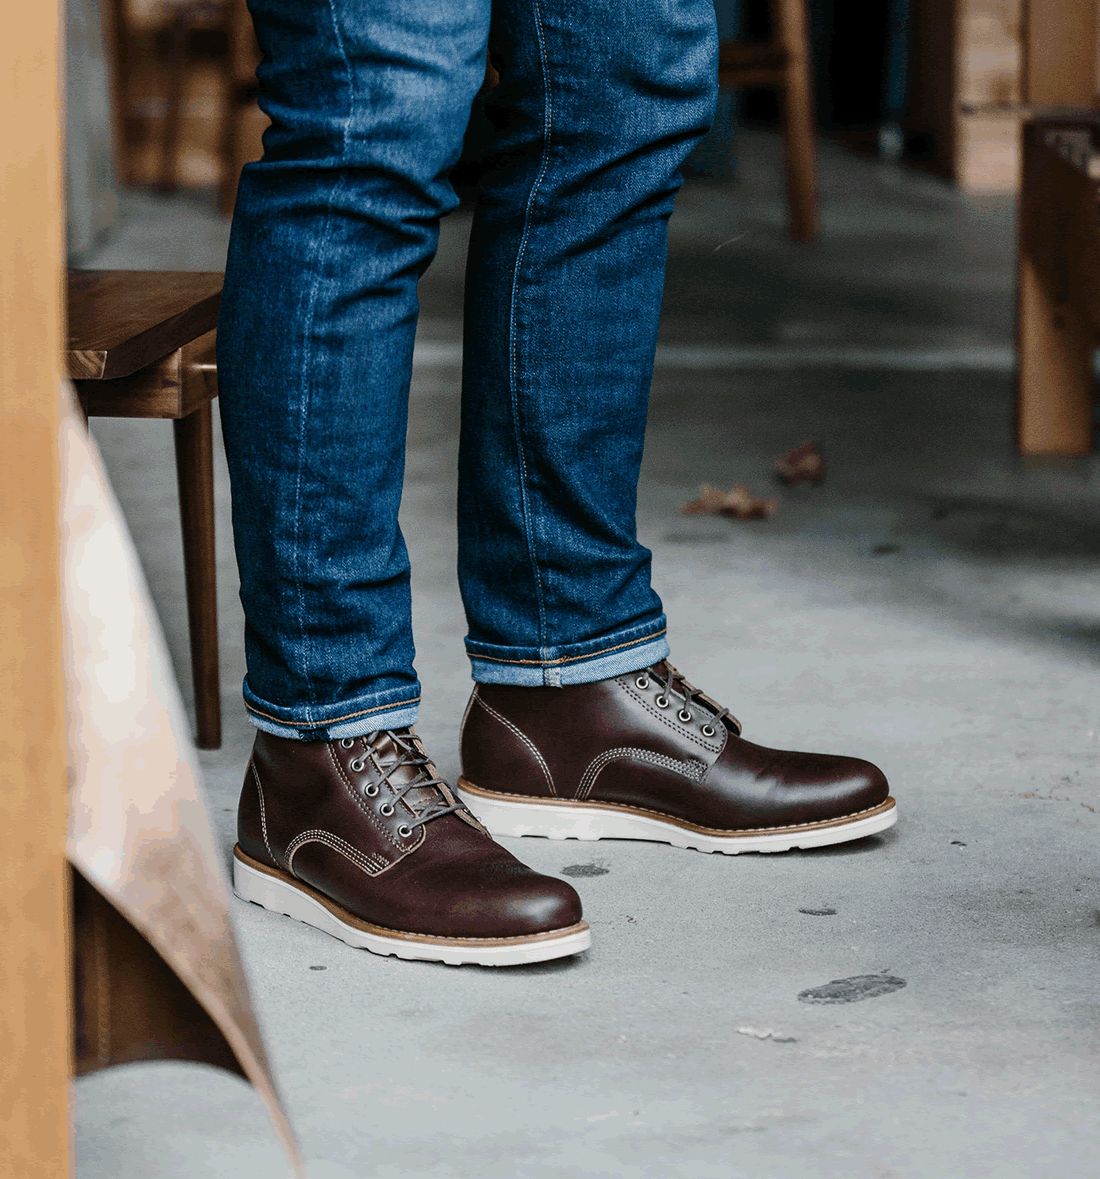 Mens Casual Boots to Wear with Jeans